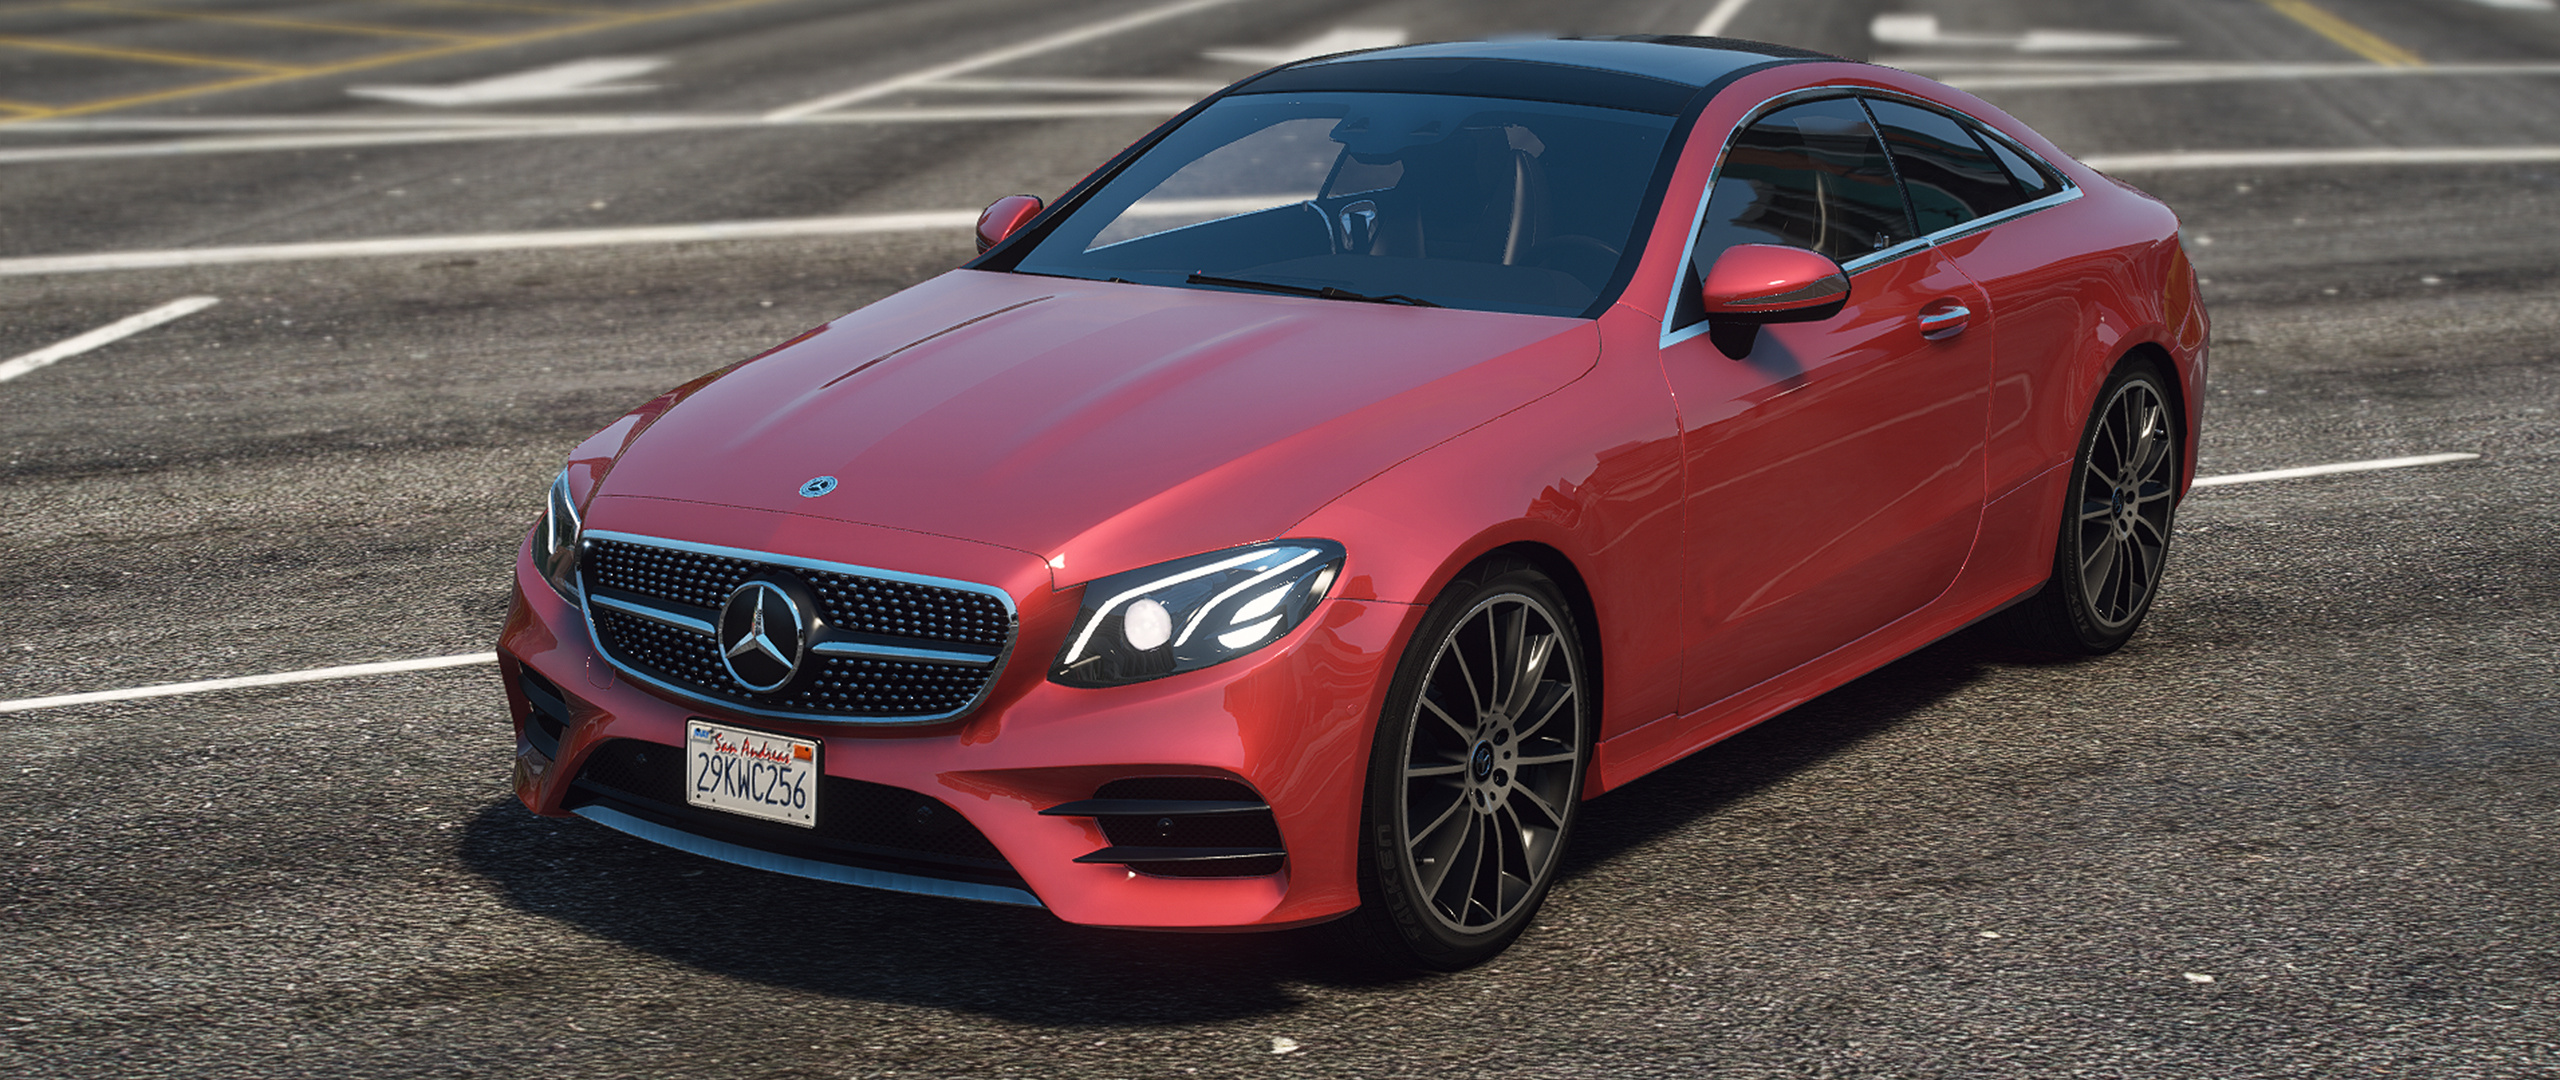 2019 Mercedes Benz E400 Coupe 4matic C238 Add On Replace Gta5 Mods Com